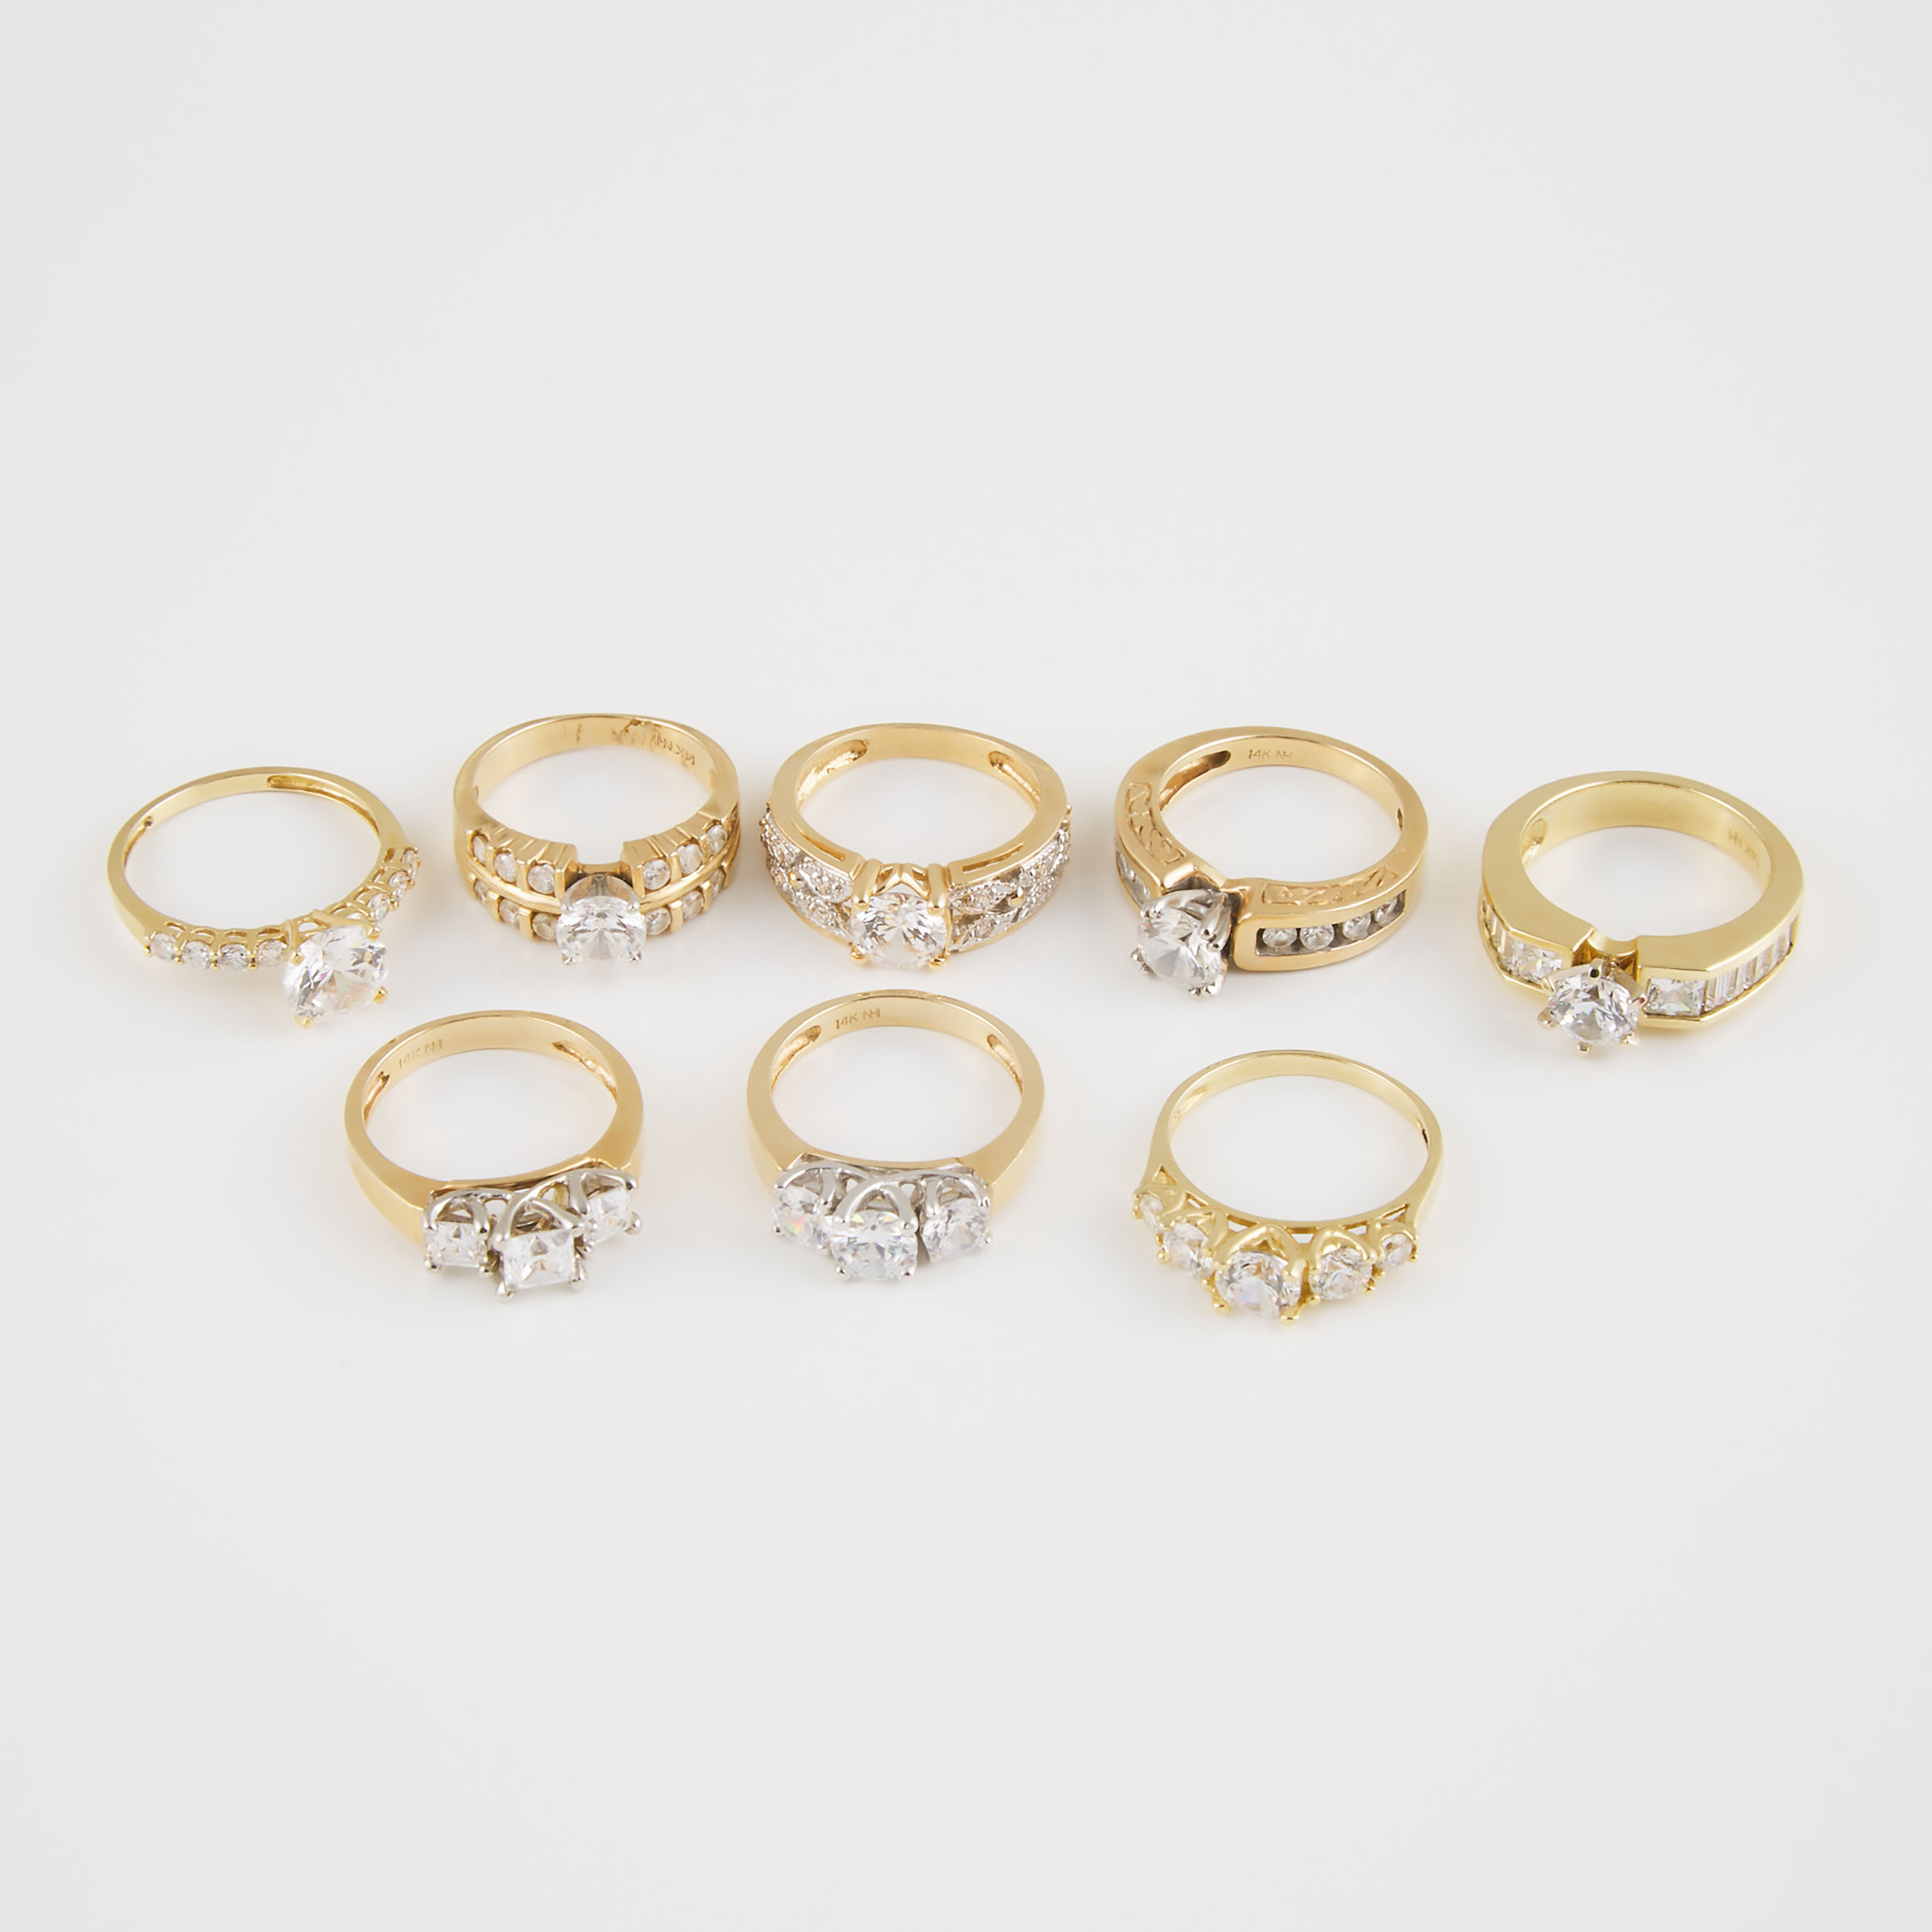 8 x 14k Yellow And White Gold Rings